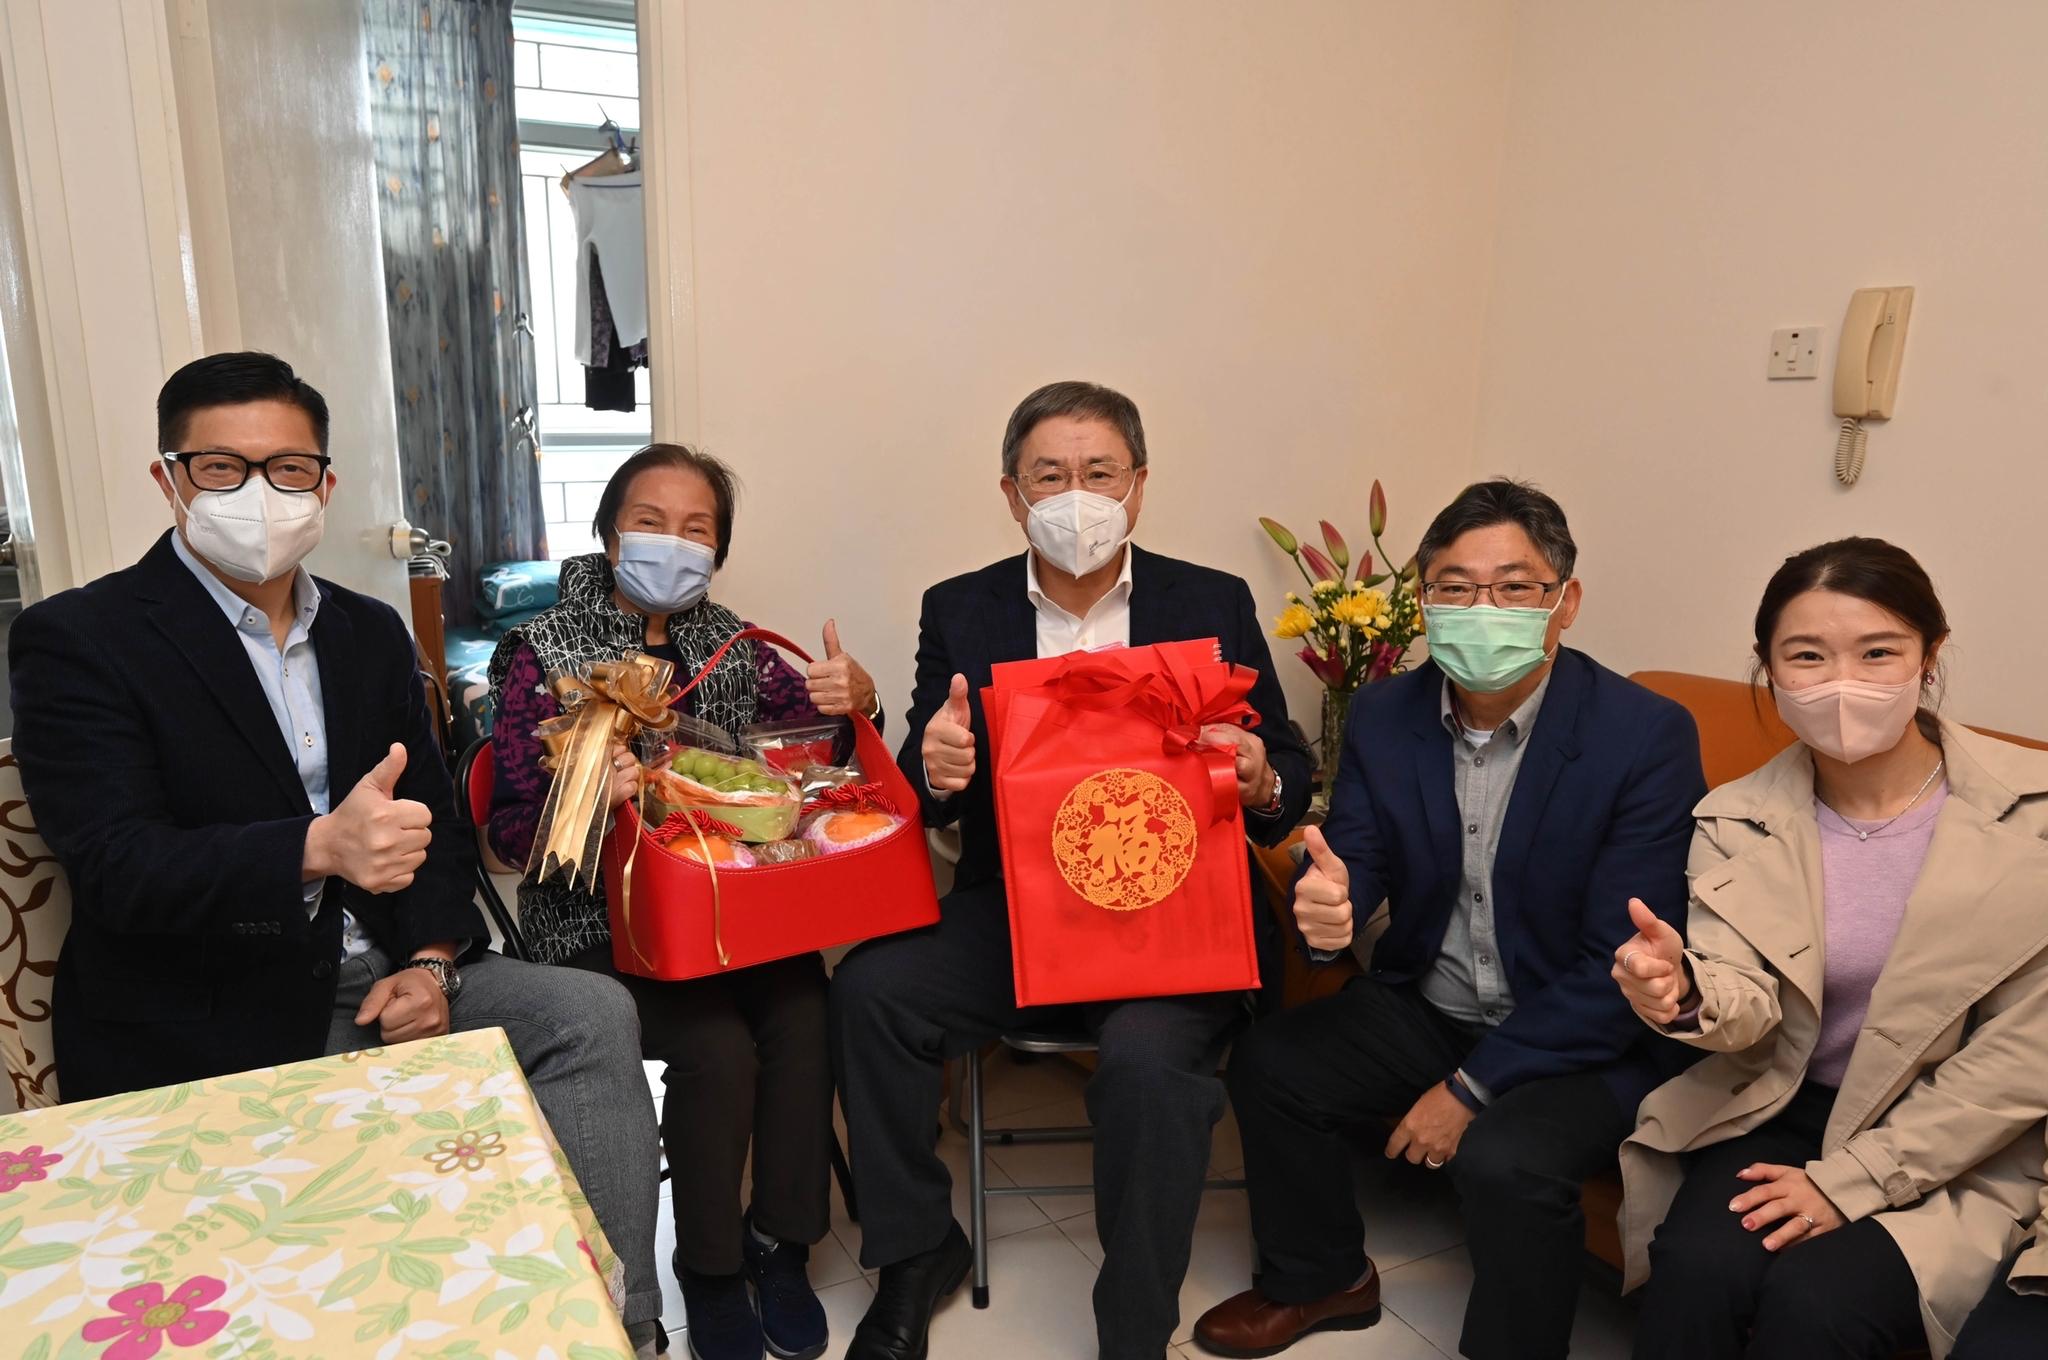 The Chief Secretary for Administration, Mr Chan Kwok-ki, and the Deputy Chief Secretary for Administration, Mr Cheuk Wing-hing, together with a number of Principal Officials, visited grass-roots families in the Eastern District to distribute Chinese New Year blessing bags and celebrate Chinese New Year with them today (January 21). Photo shows Mr Cheuk (centre); the Secretary for Security, Mr Tang Ping-keung (first left); and the Secretary for Transport and Logistics, Mr Lam Sai-hung (second right), visiting an elderly singleton to extend Lunar New Year greetings to elderlies.